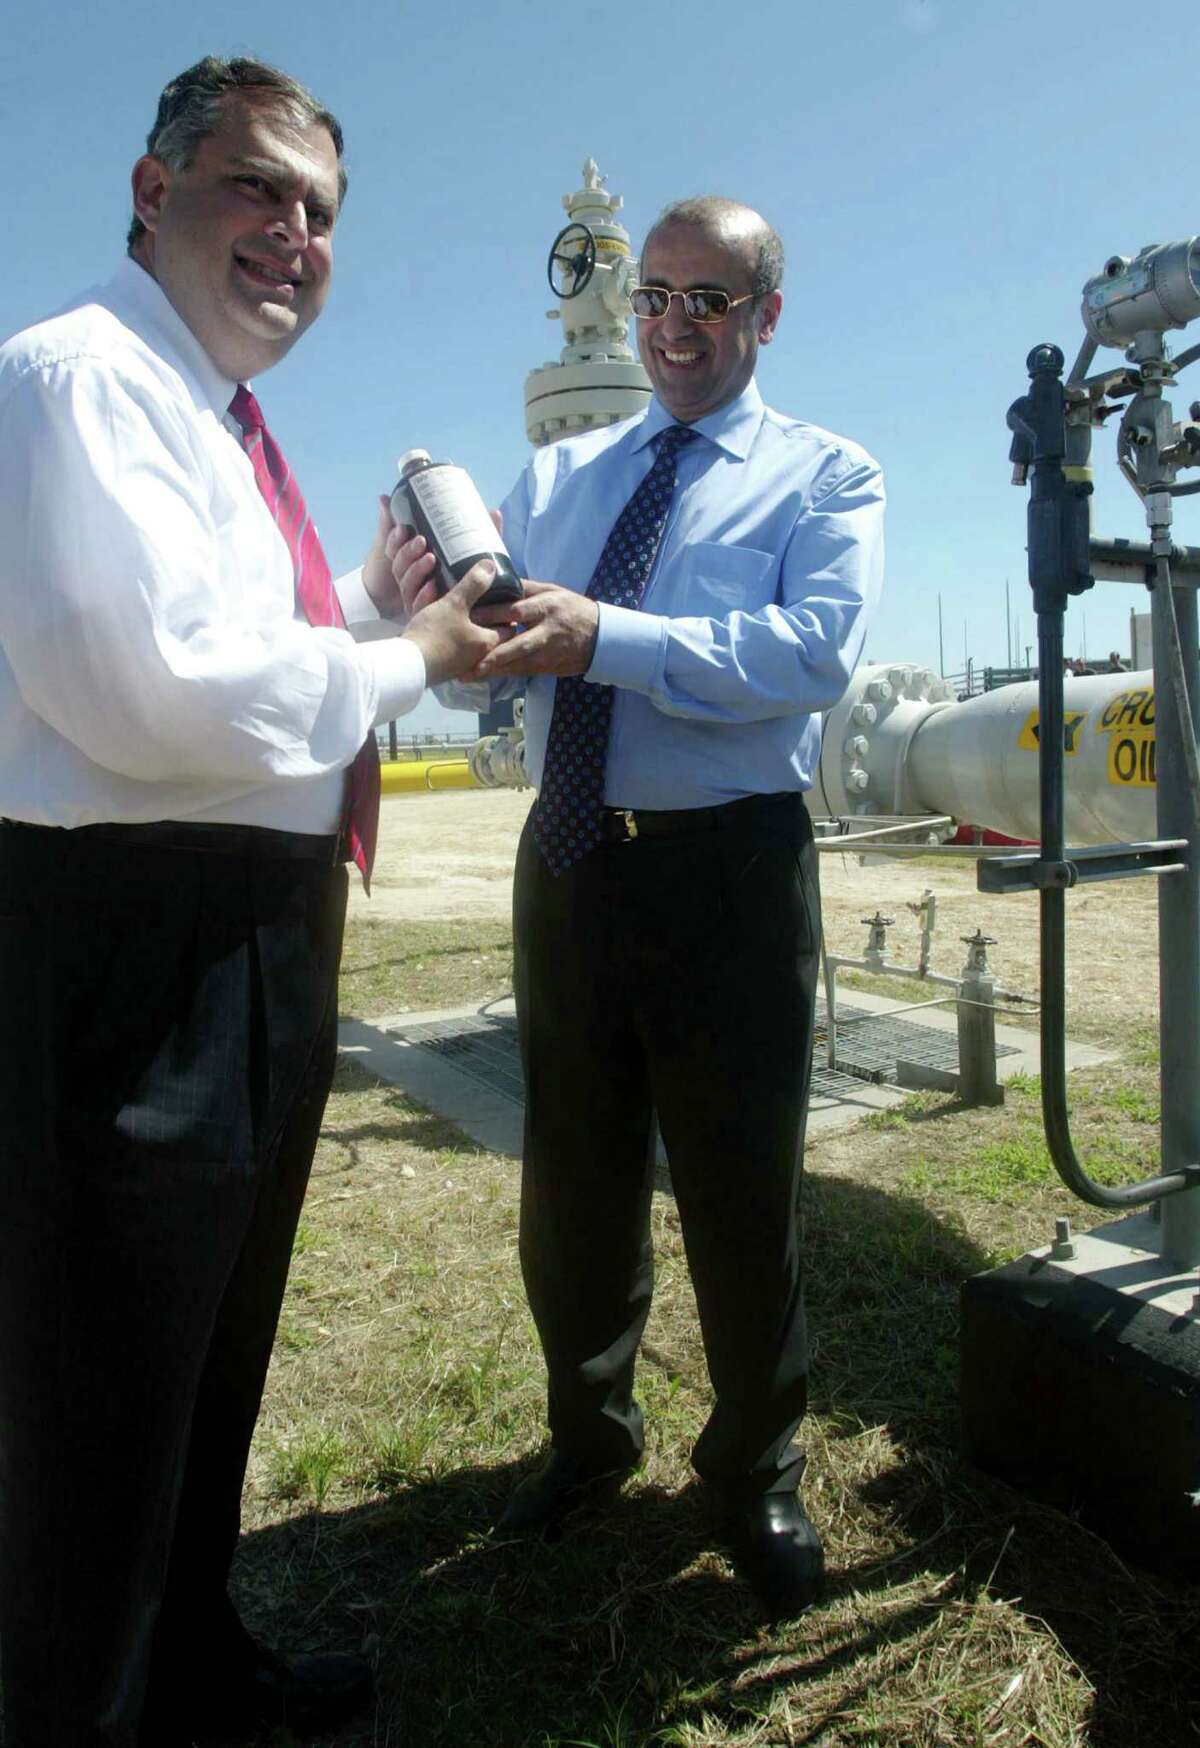 FREEPORT, TX - OCTOBER 1: U.S. Secretary of Energy Spencer Abraham (L) and Russian Minister of Energy Igor Yusufov (R) hold a bottle of crude oil during their tour of the U.S. Strategic Petroleum Reserve's Bryan Mound facility October 1, 2002 in Freeport, Texas. Abraham said that the Bush administration will not touch the crude oil stockpile unless there is a "major supply disruption." (Photo by James Nielsen/Getty Images)